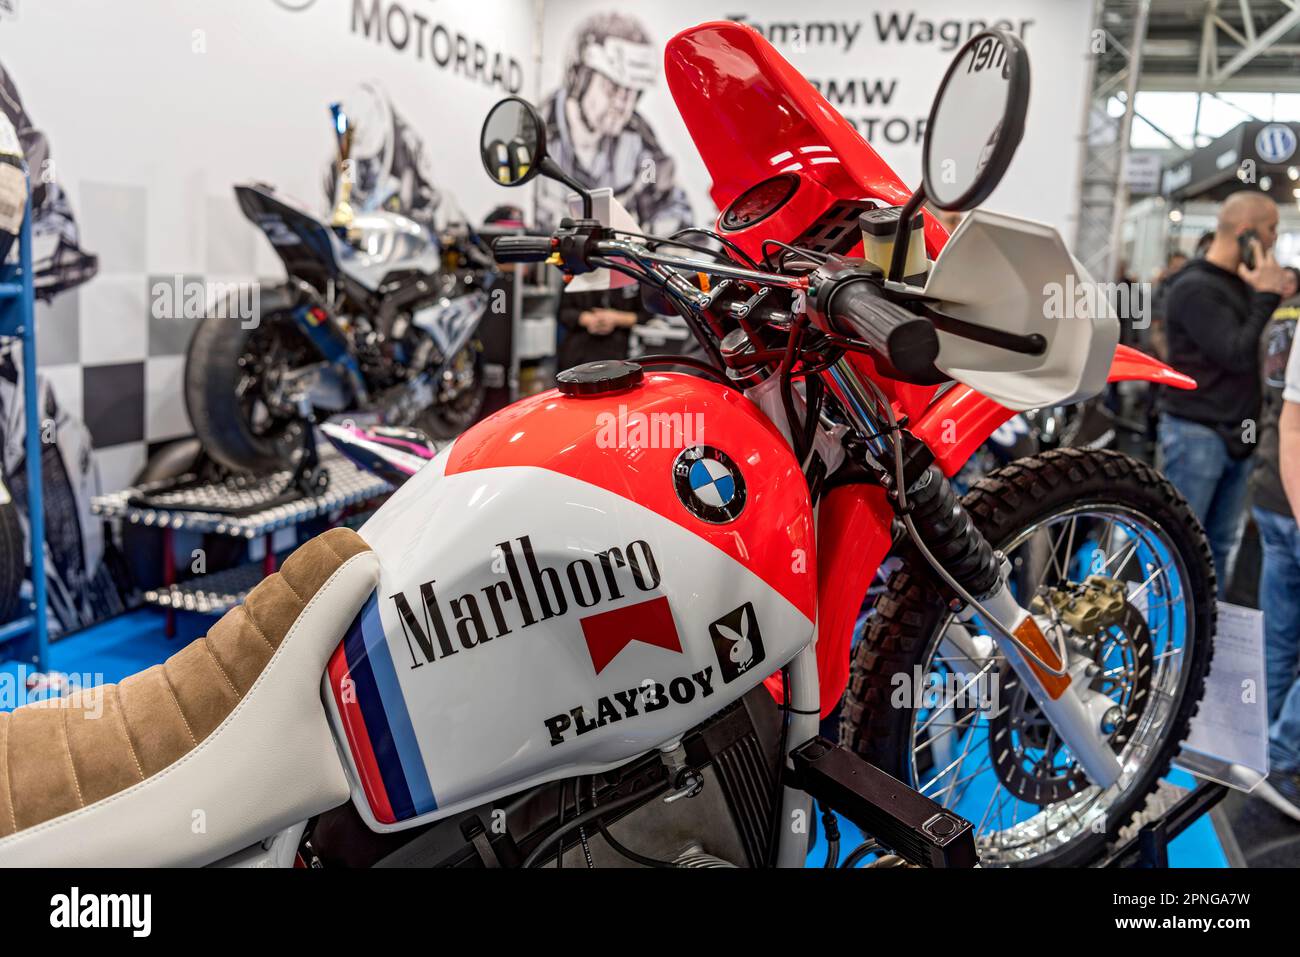 BMW R 80 G S Lac Rose, off-road racing motorbike by Tommy Wagner, logos of Marlboro and Playboy, advertising on the tank, motorbike racing, iMOT Stock Photo